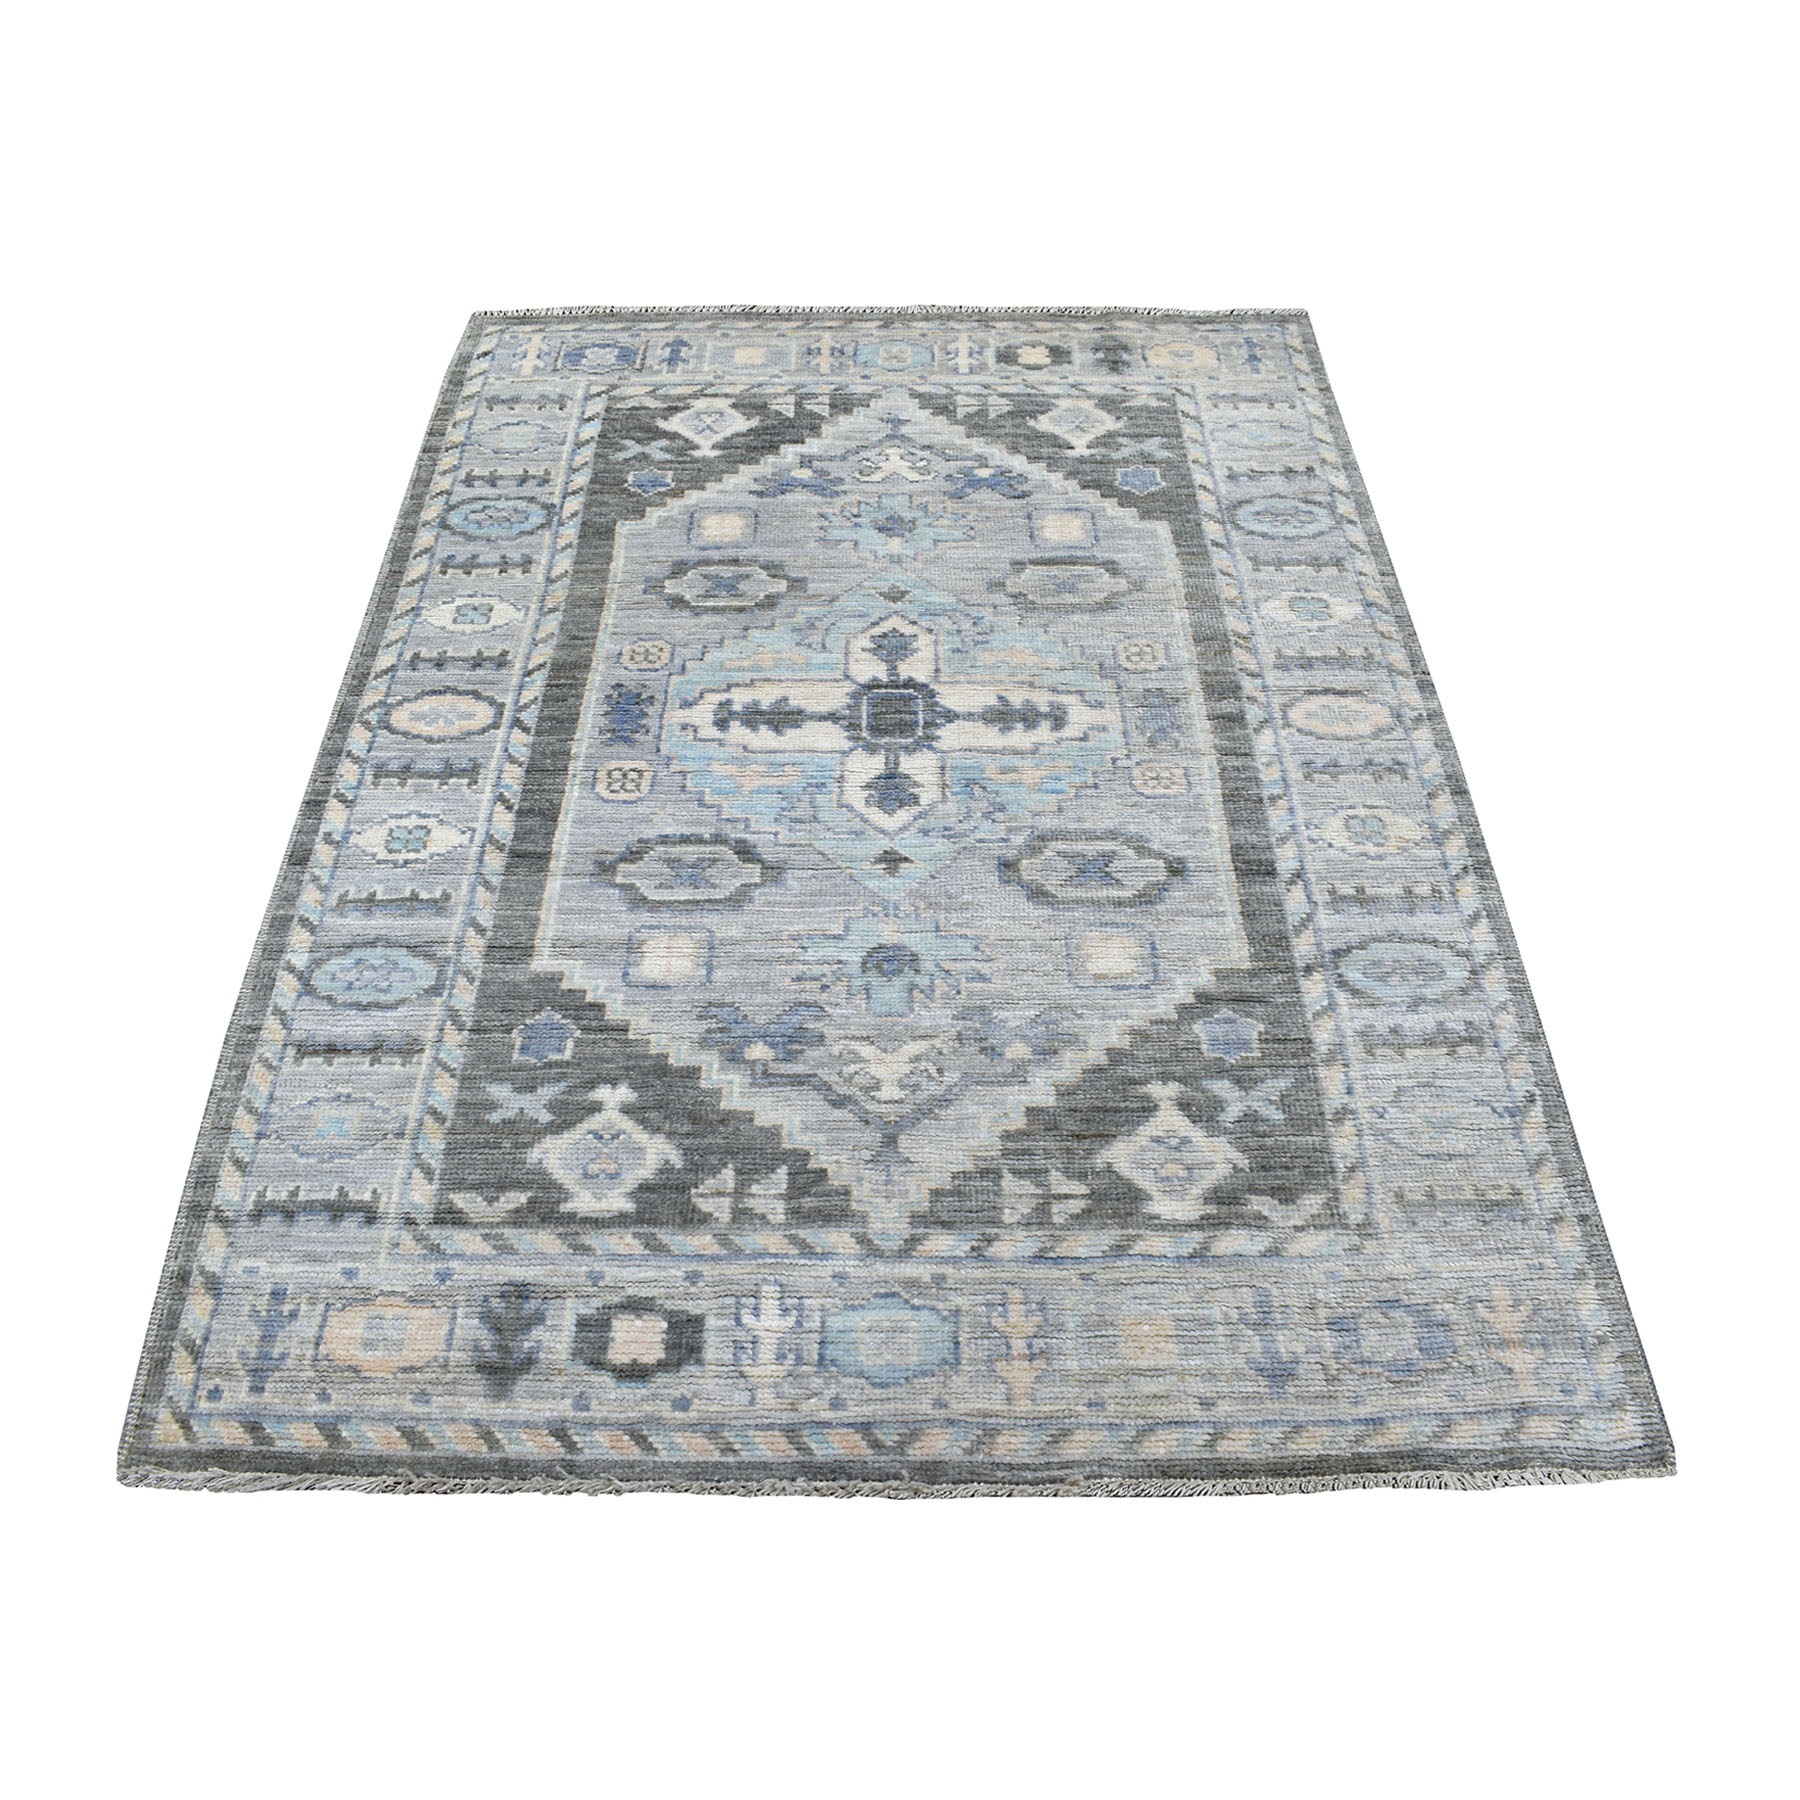 Nomadic And Village Collection Hand Knotted Grey Rug No: 1135716